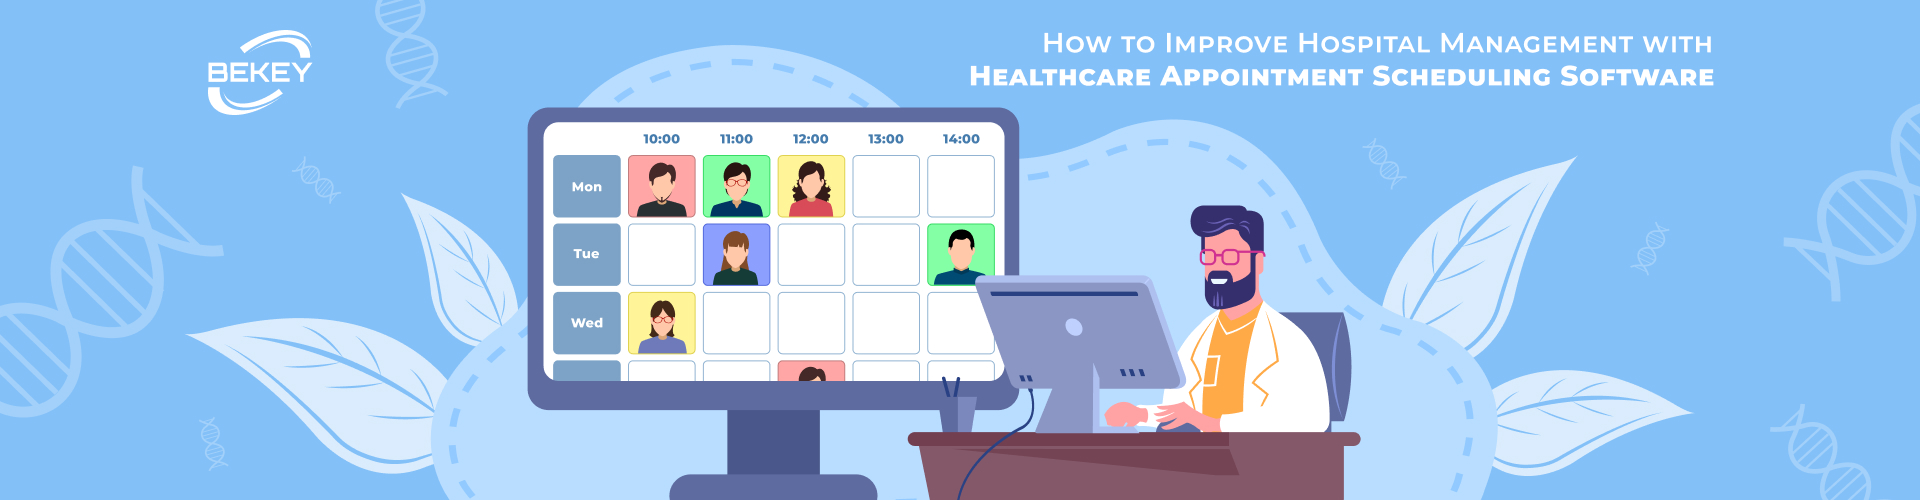 How to Improve Hospital Management with Healthcare Appointment Scheduling Software - image